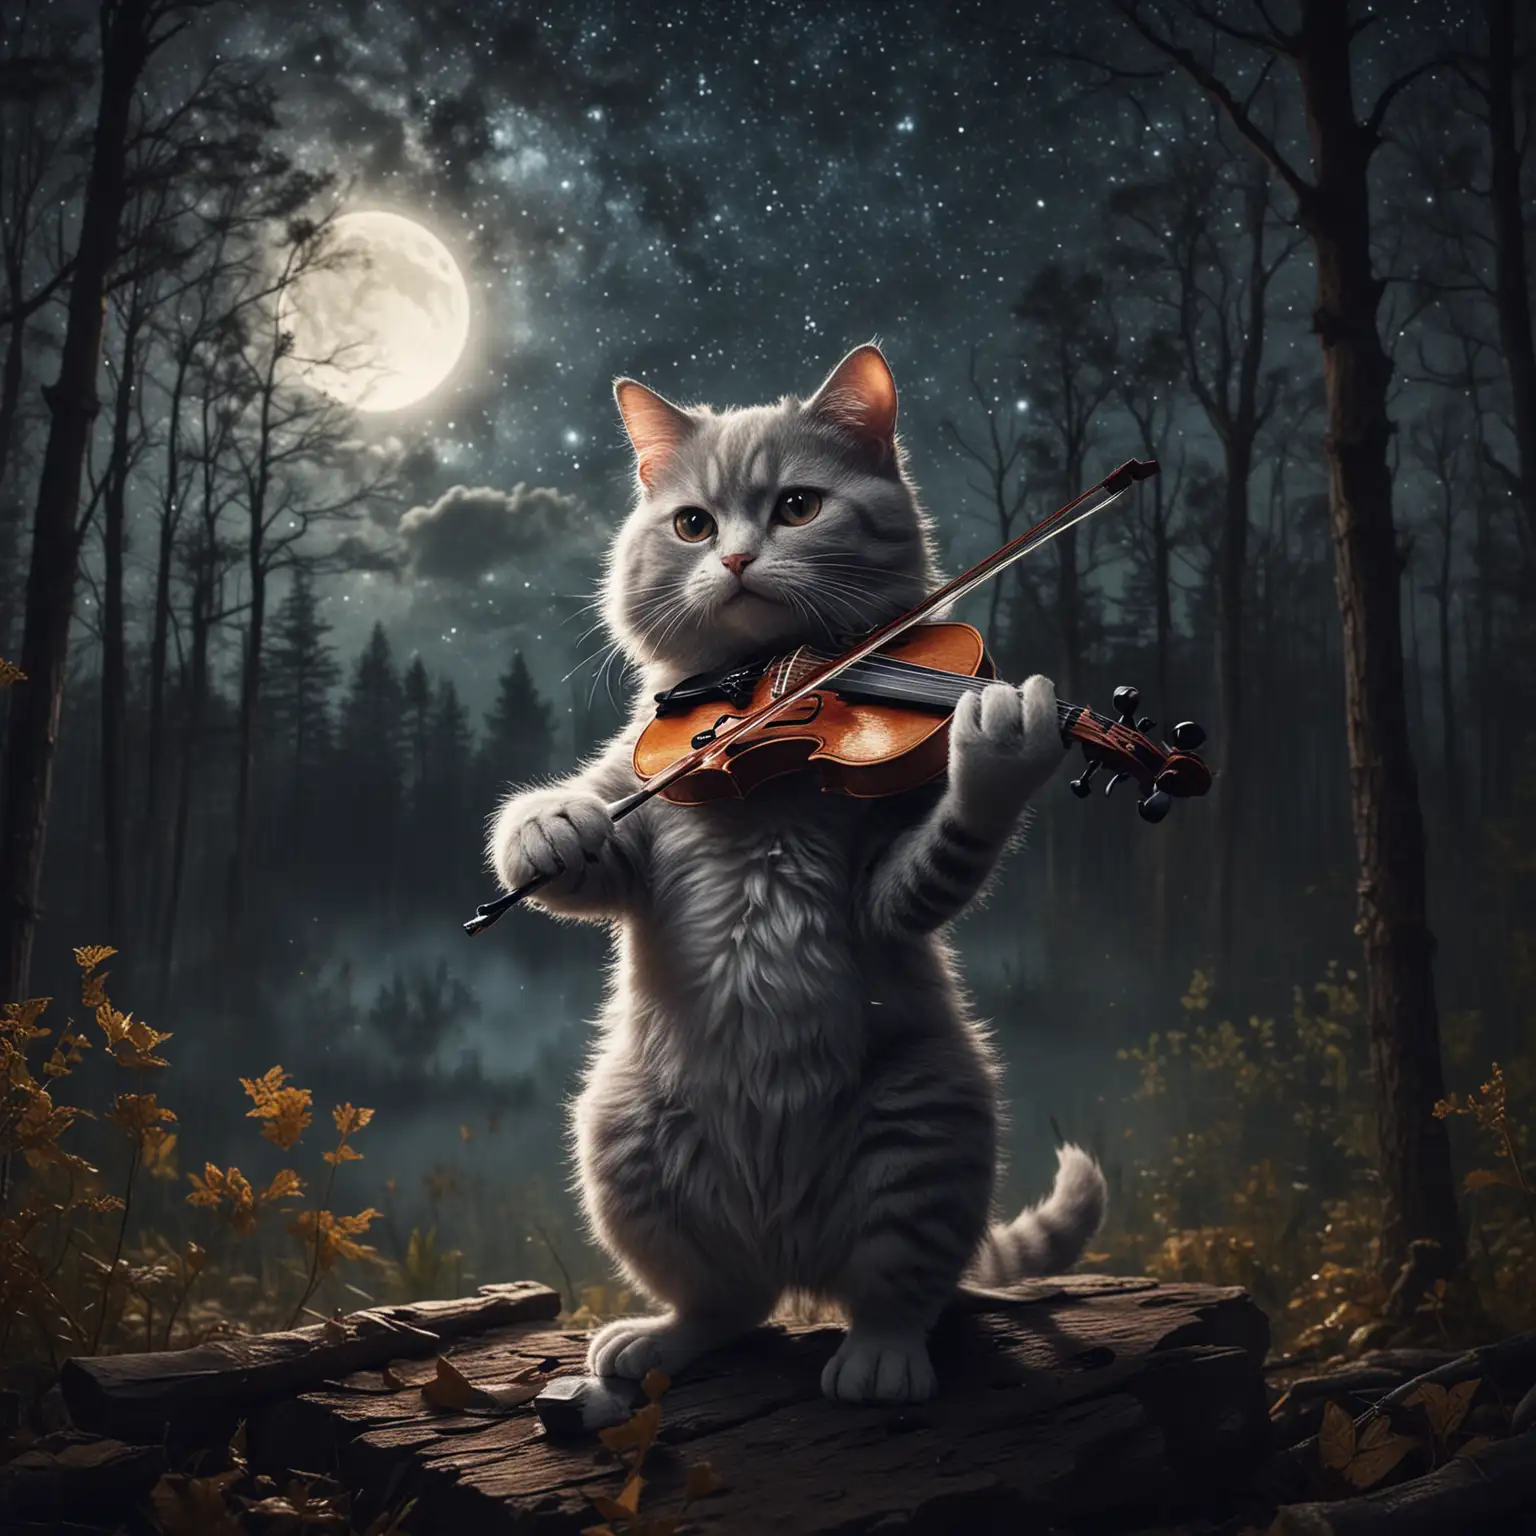 a cat playing violin at night in a woods with a night sky